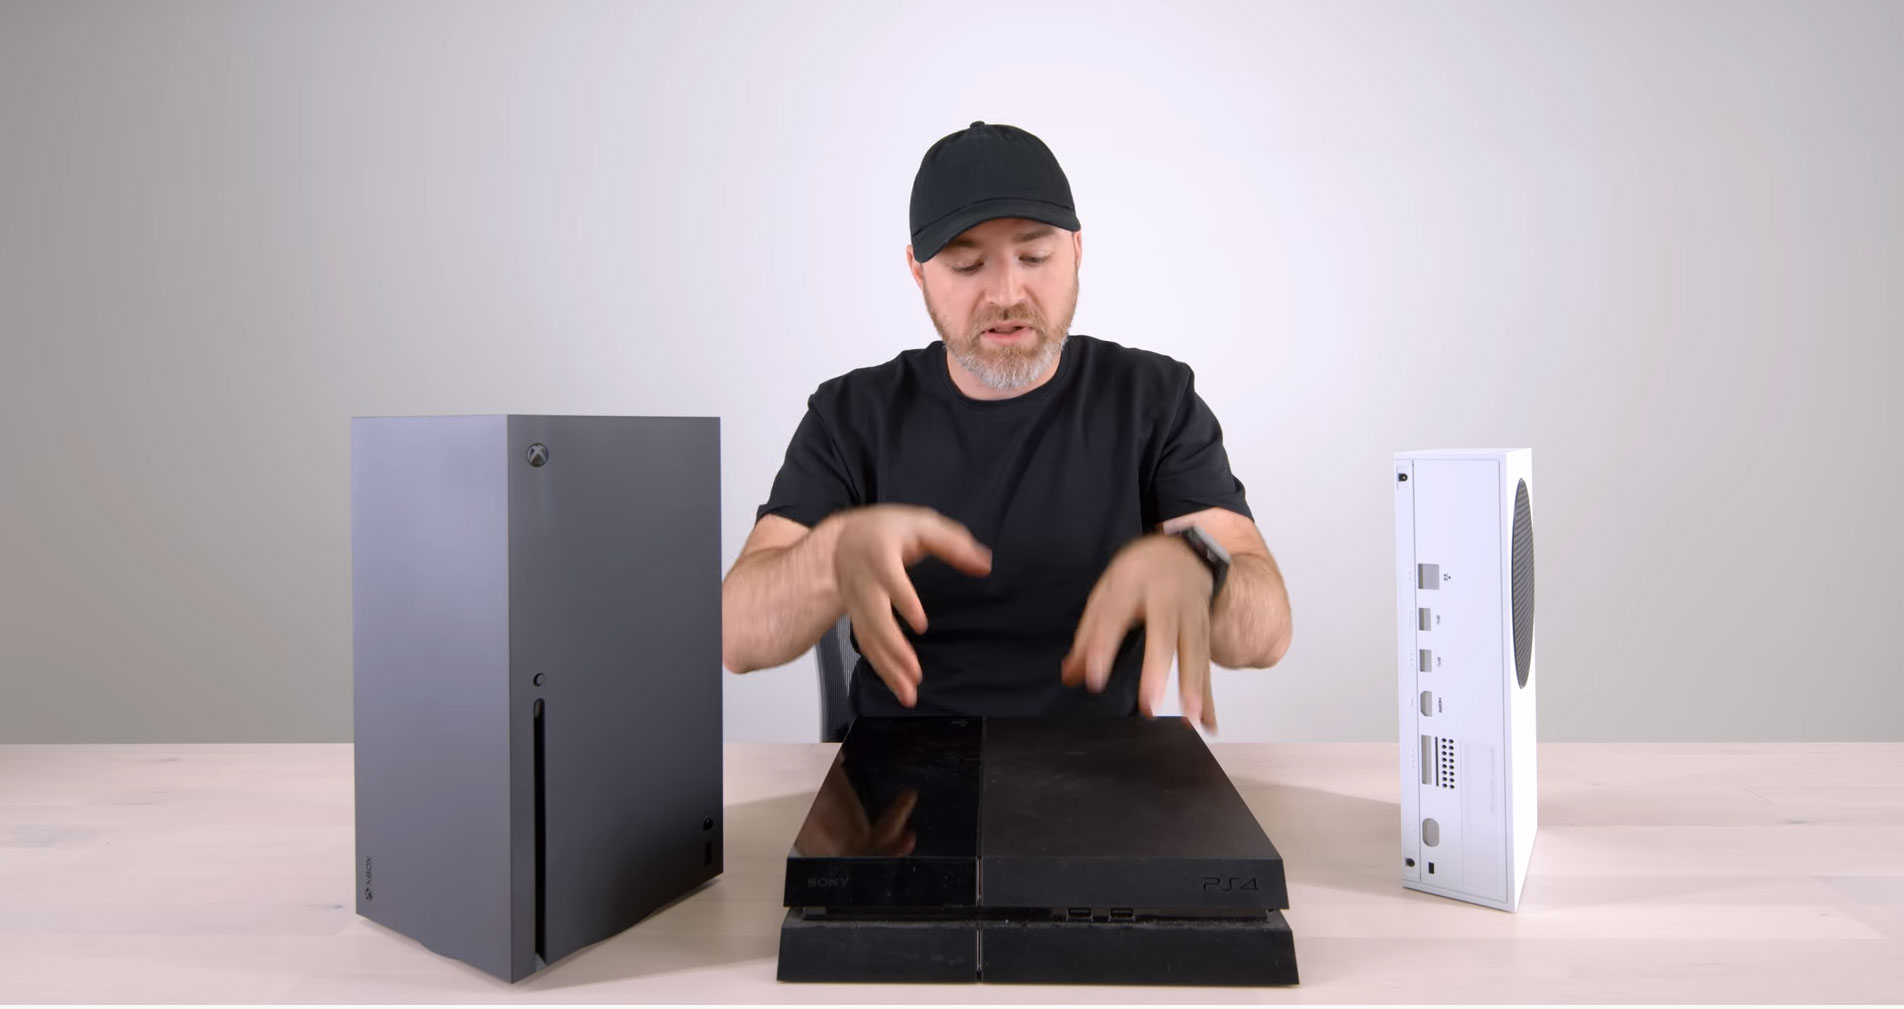 I Don’t Think We’re Ready For How Big The Xbox Series X Really Is